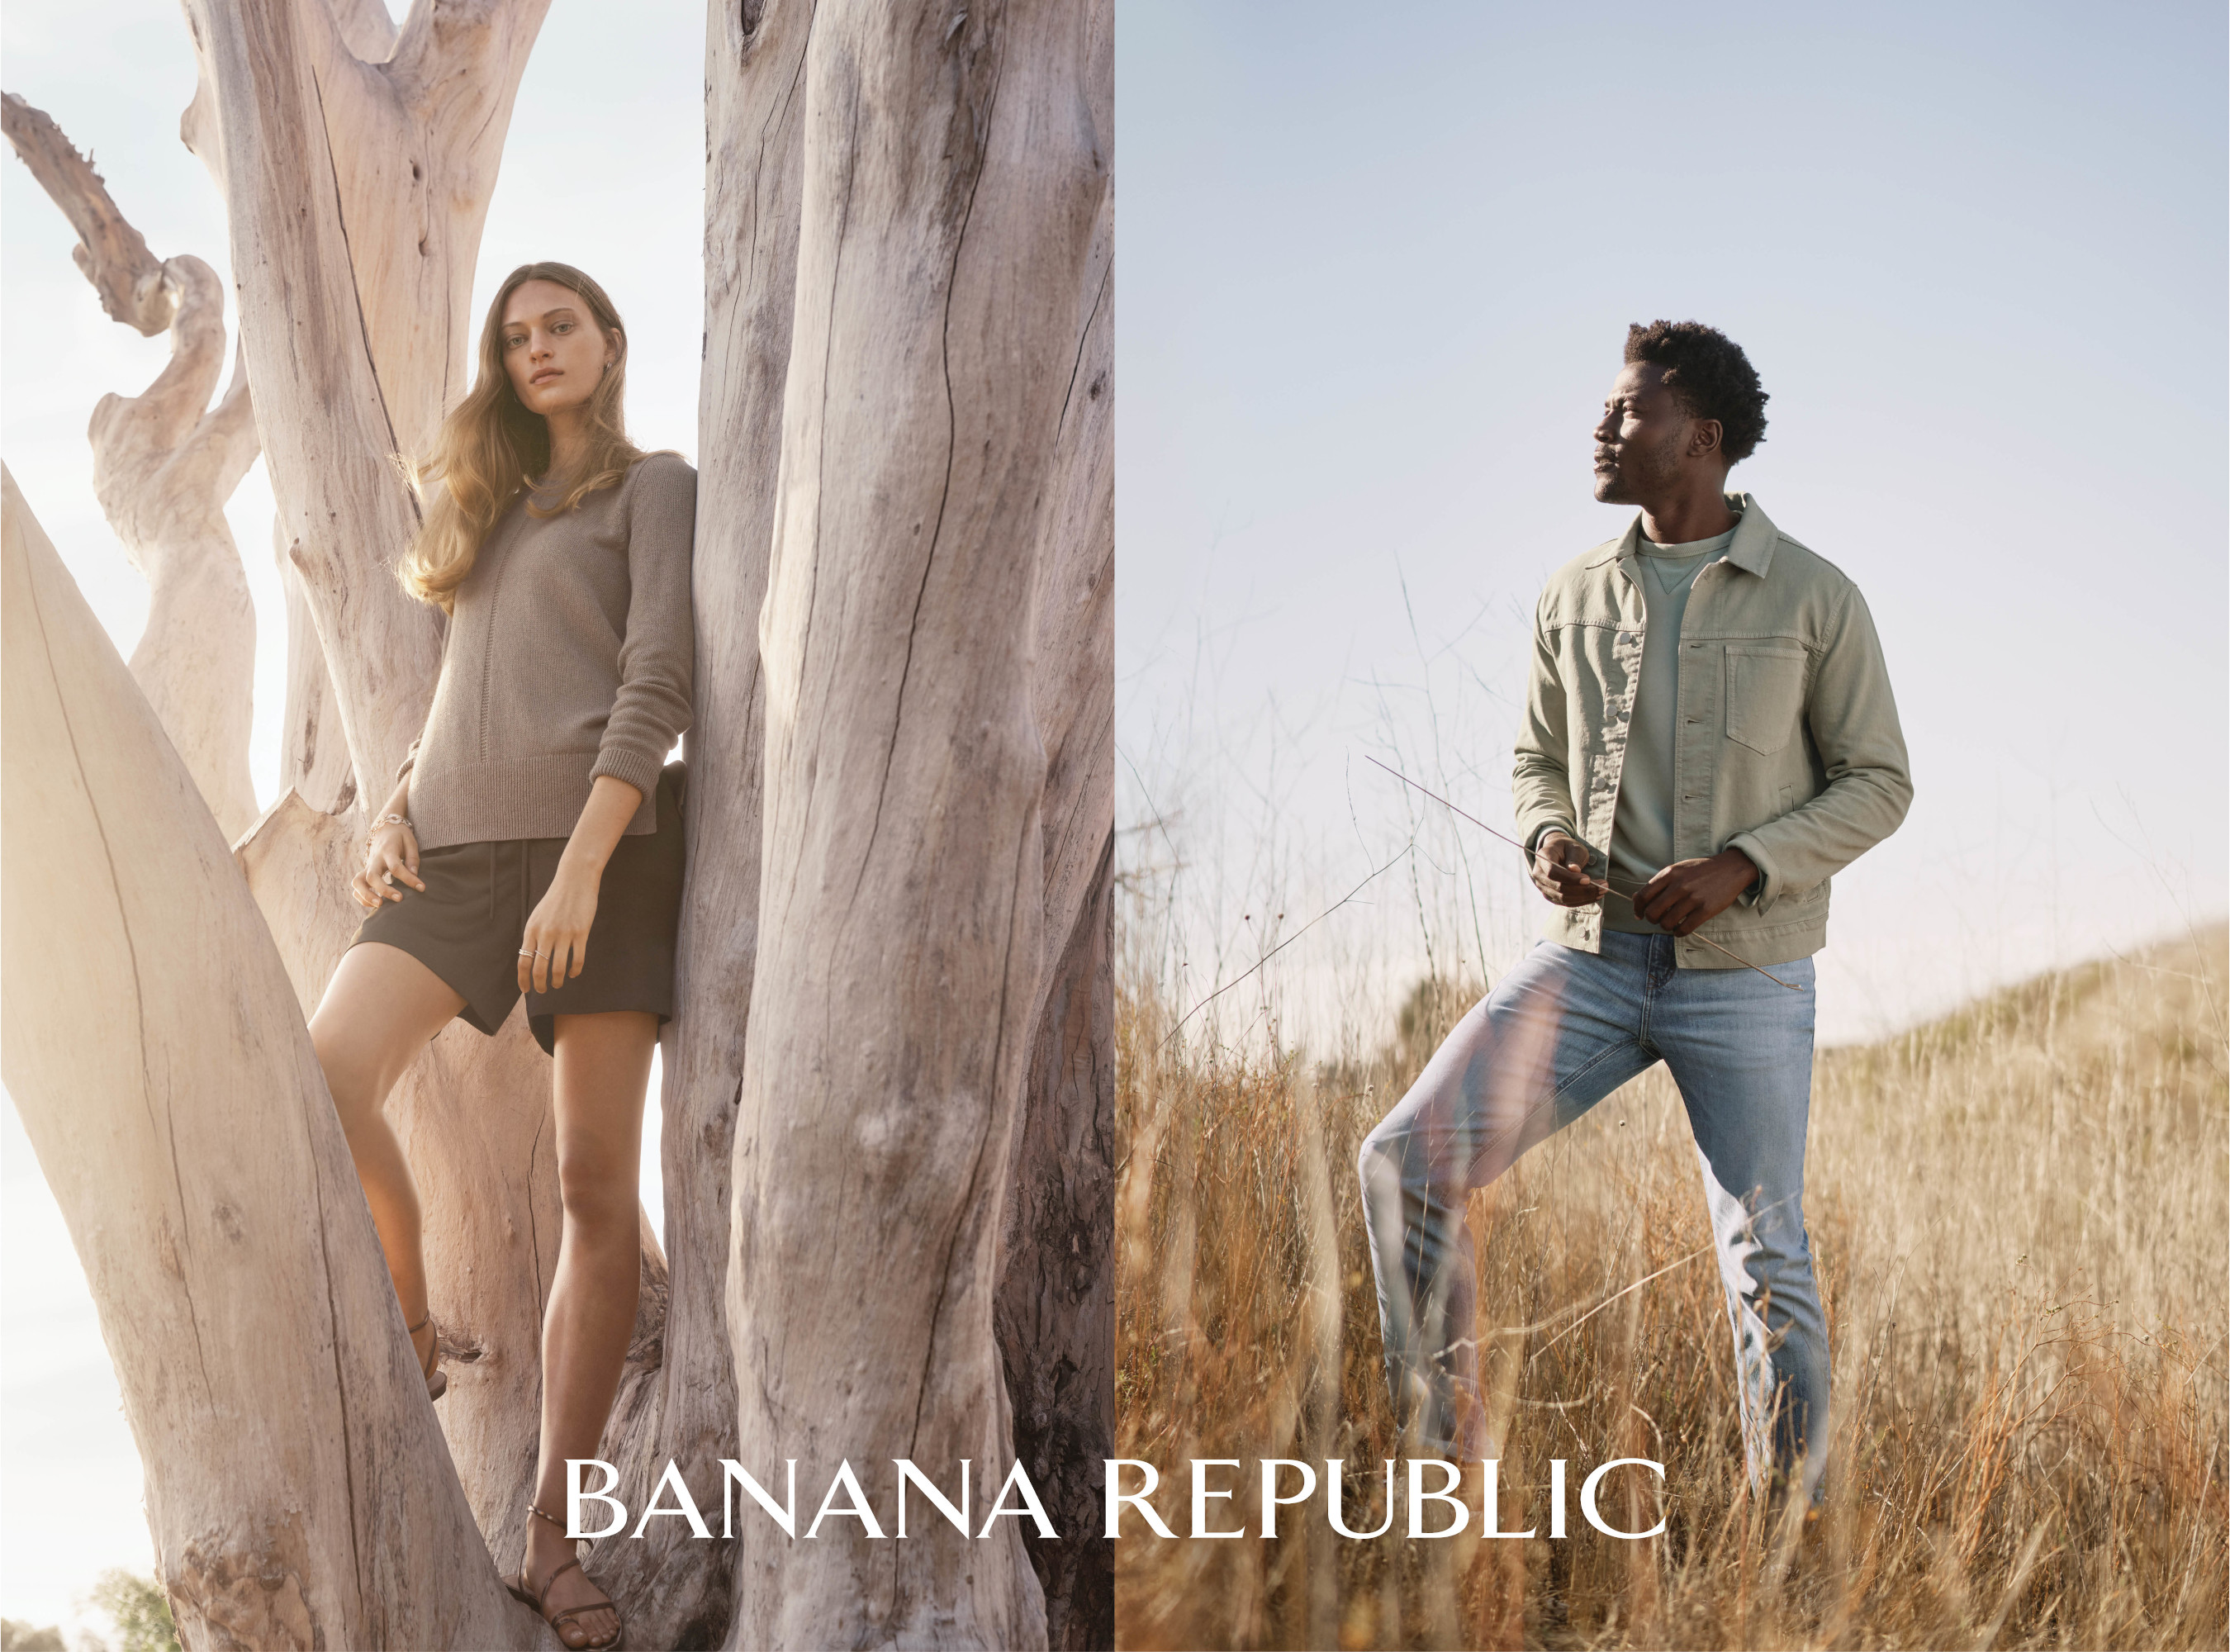 In Banana Republic’s ongoing commitment to sustainability, the brand’s March and April campaigns will shine a light on the brand’s continued sustainability journey through products and fabrications with impact, including denim and cotton.